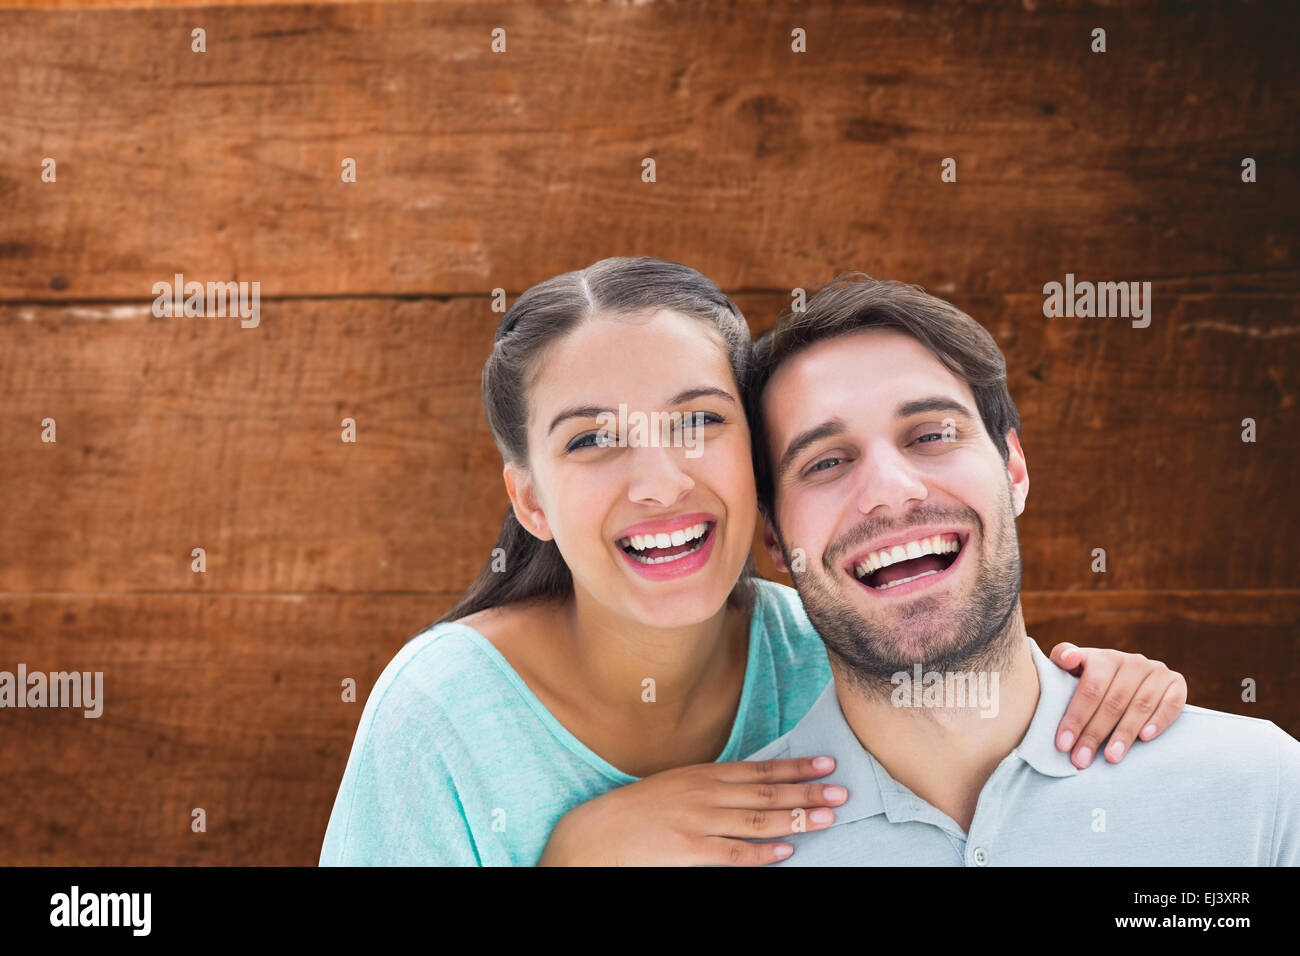 Composite image of cute couple smiling at camera Stock Photo